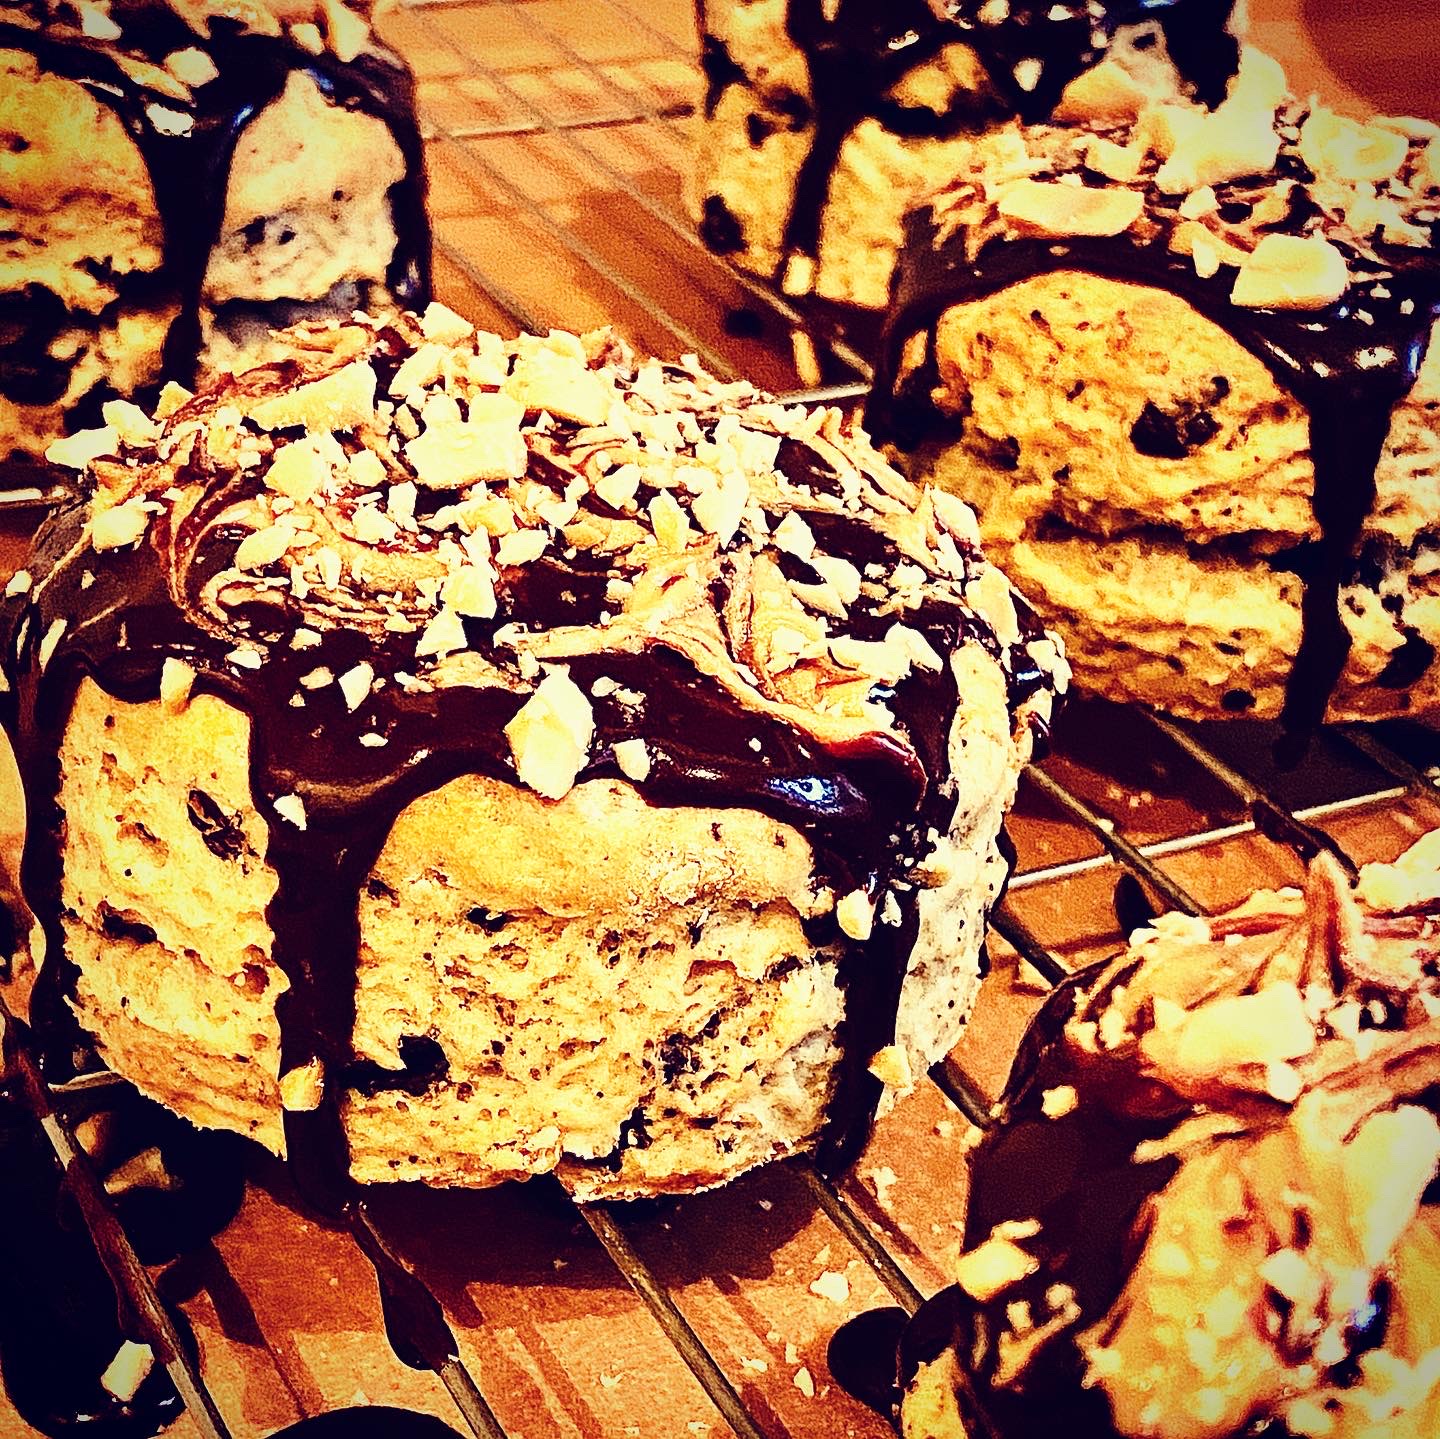 Vegan peanut butter and chocolate scones, topped with chocolate ganache icing and swirls of peanut butter with a crunchy peanut topping